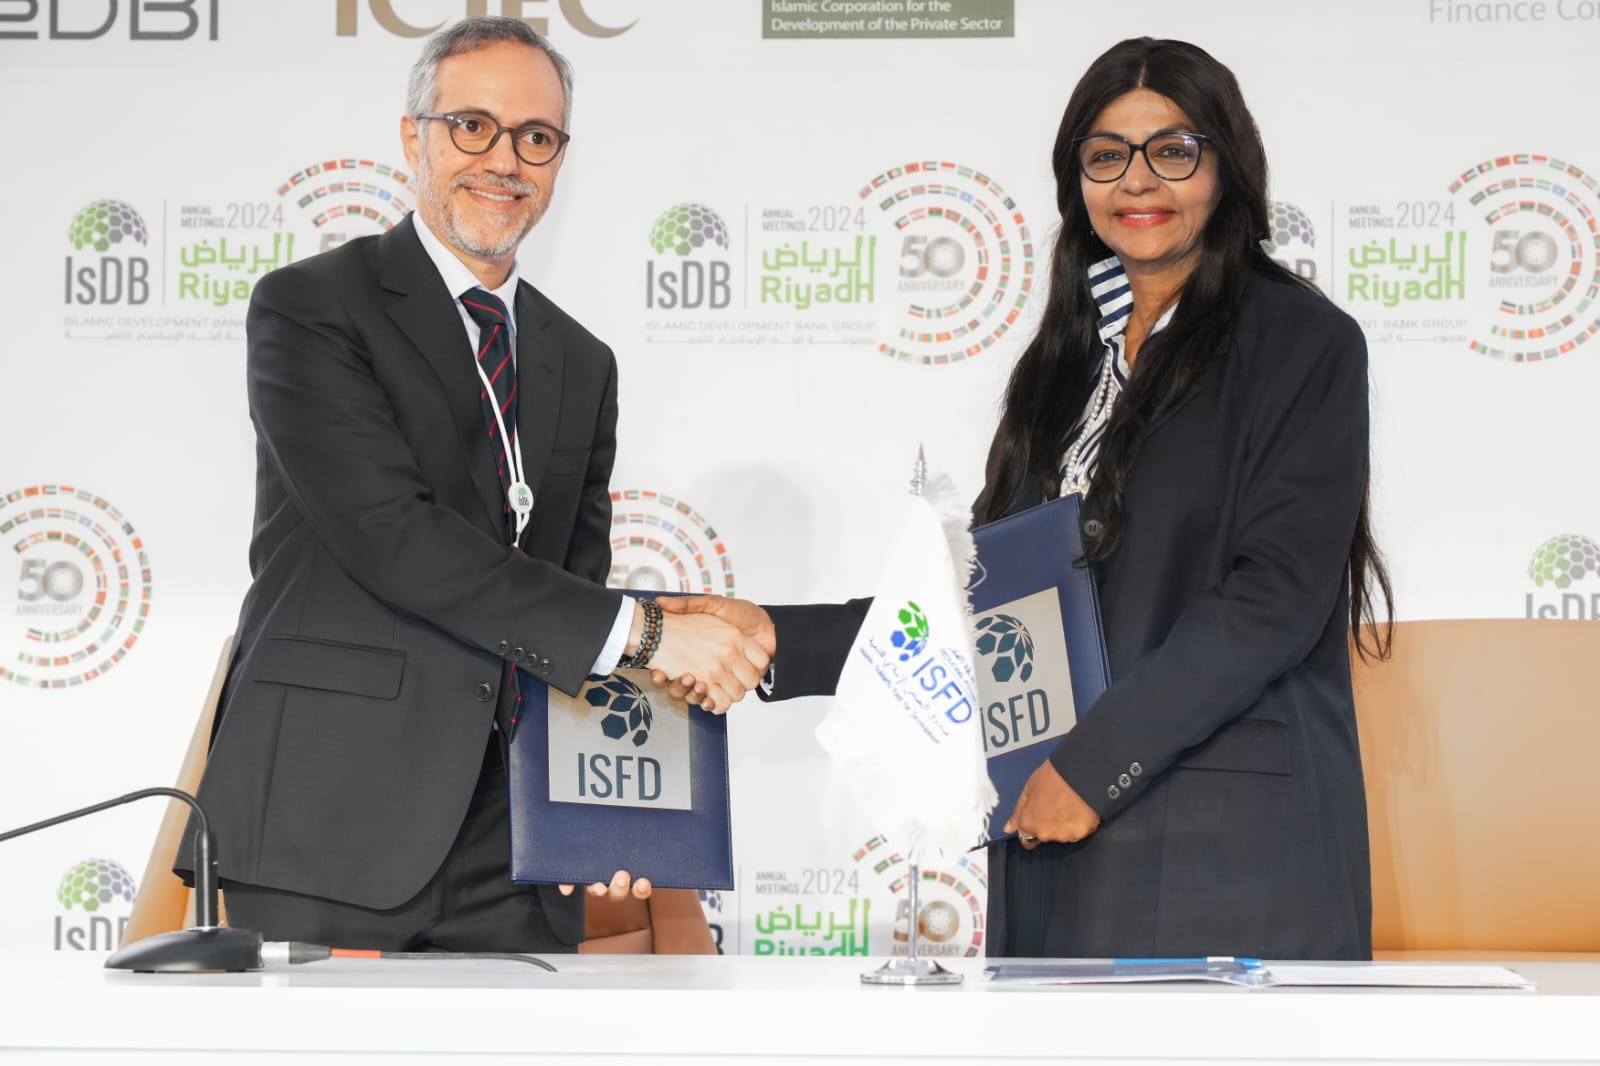 ISDB AND ISFD sign with INNOVX to support the agricultural industry in Africa